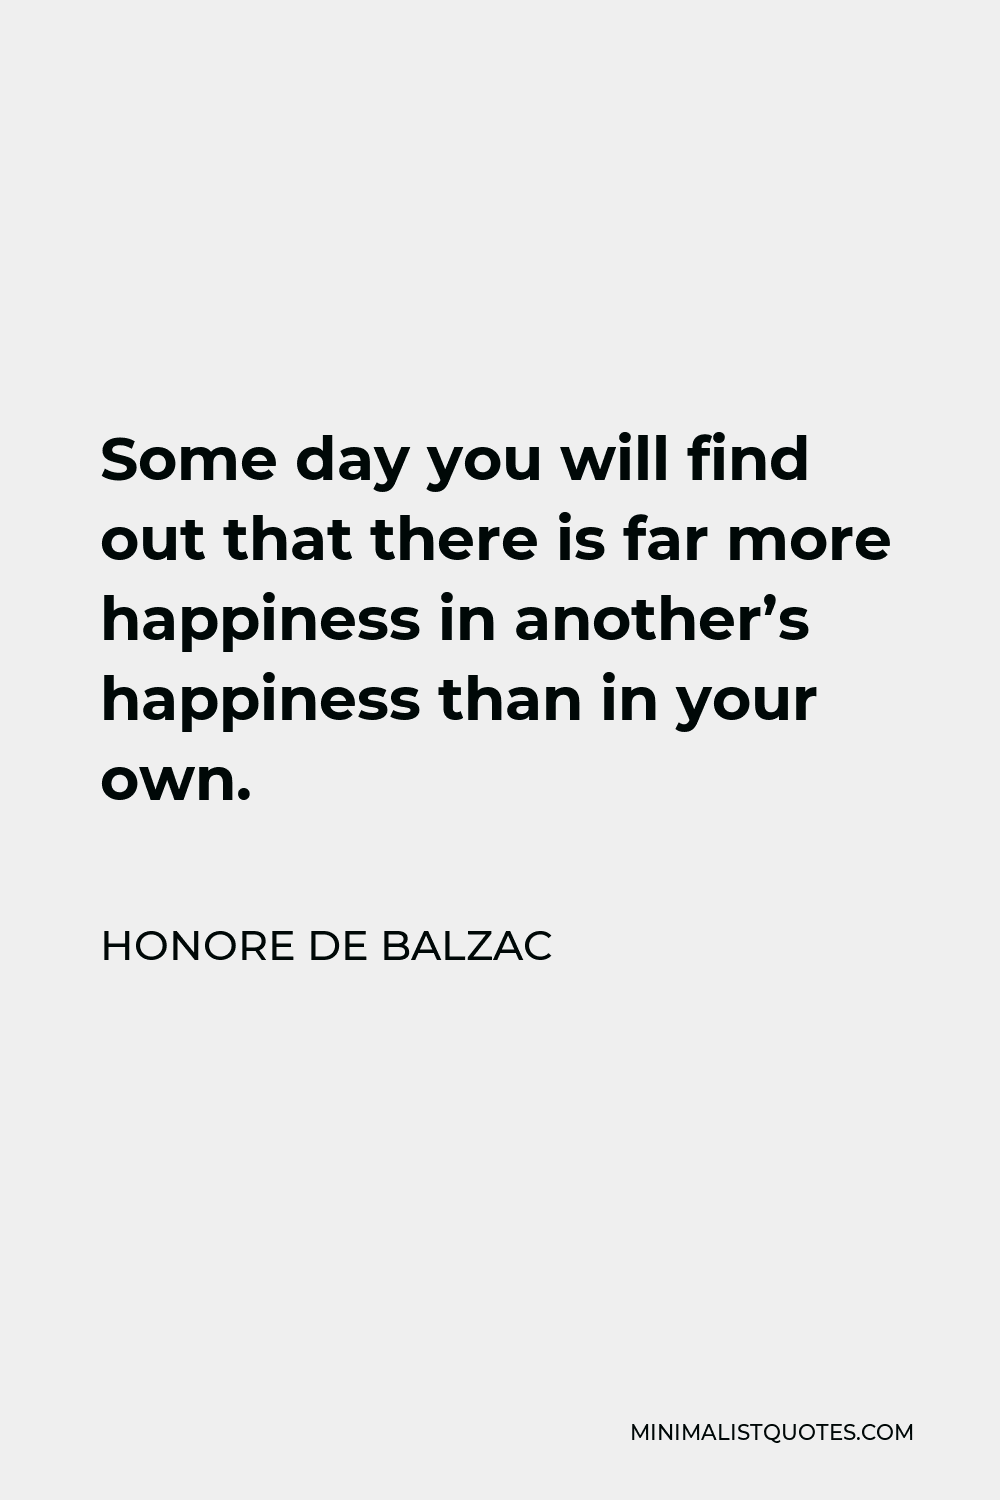 Honore de Balzac Quote - Some day you will find out that there is far more happiness in another’s happiness than in your own.